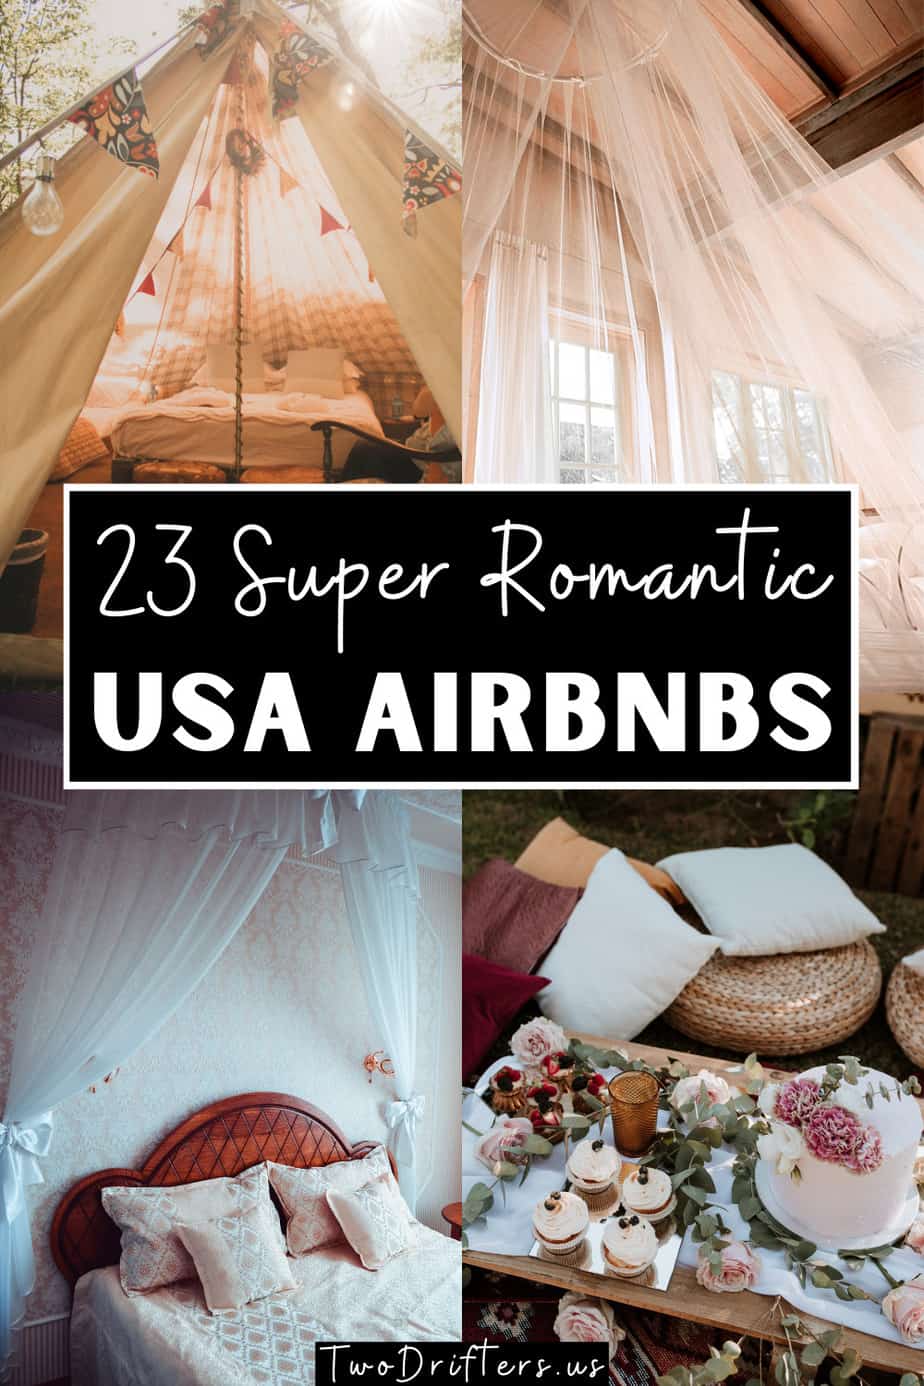 Pinterest social share image that says "23 Super Romantic USA Airbnbs."